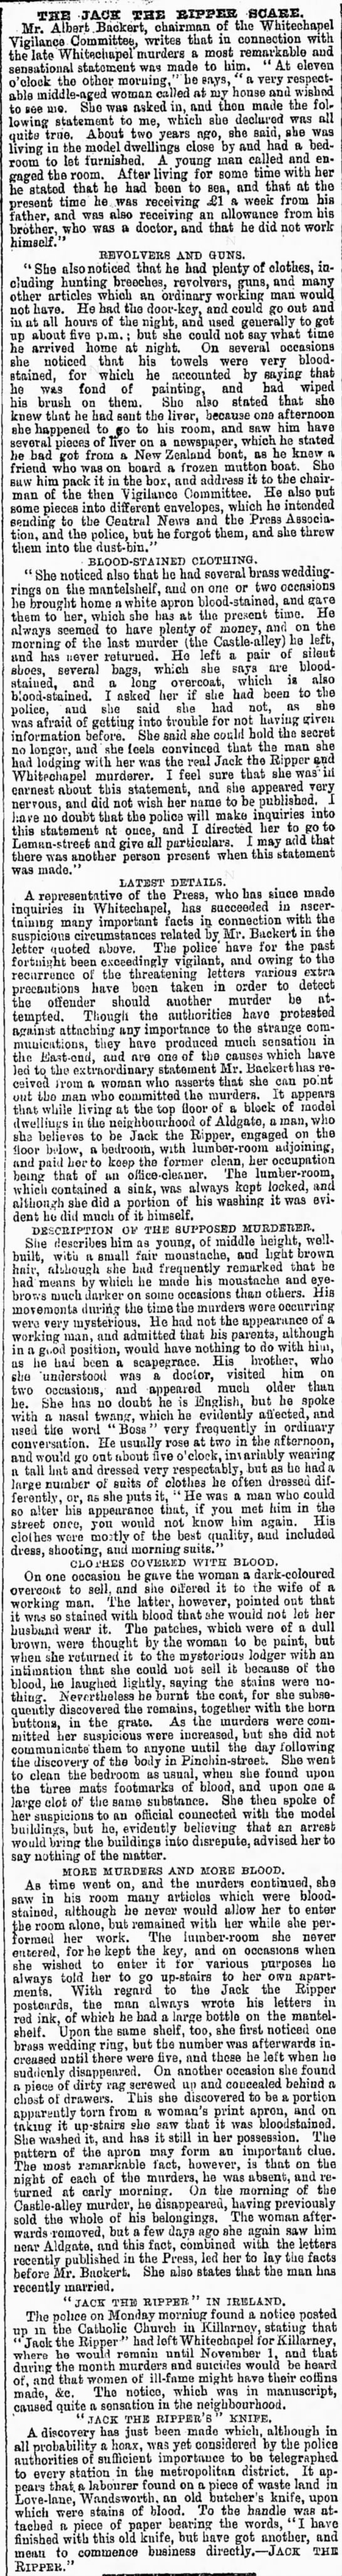 Woman gives evidence that man who rented a room from her was actually Jack the Ripper, 1890 - 